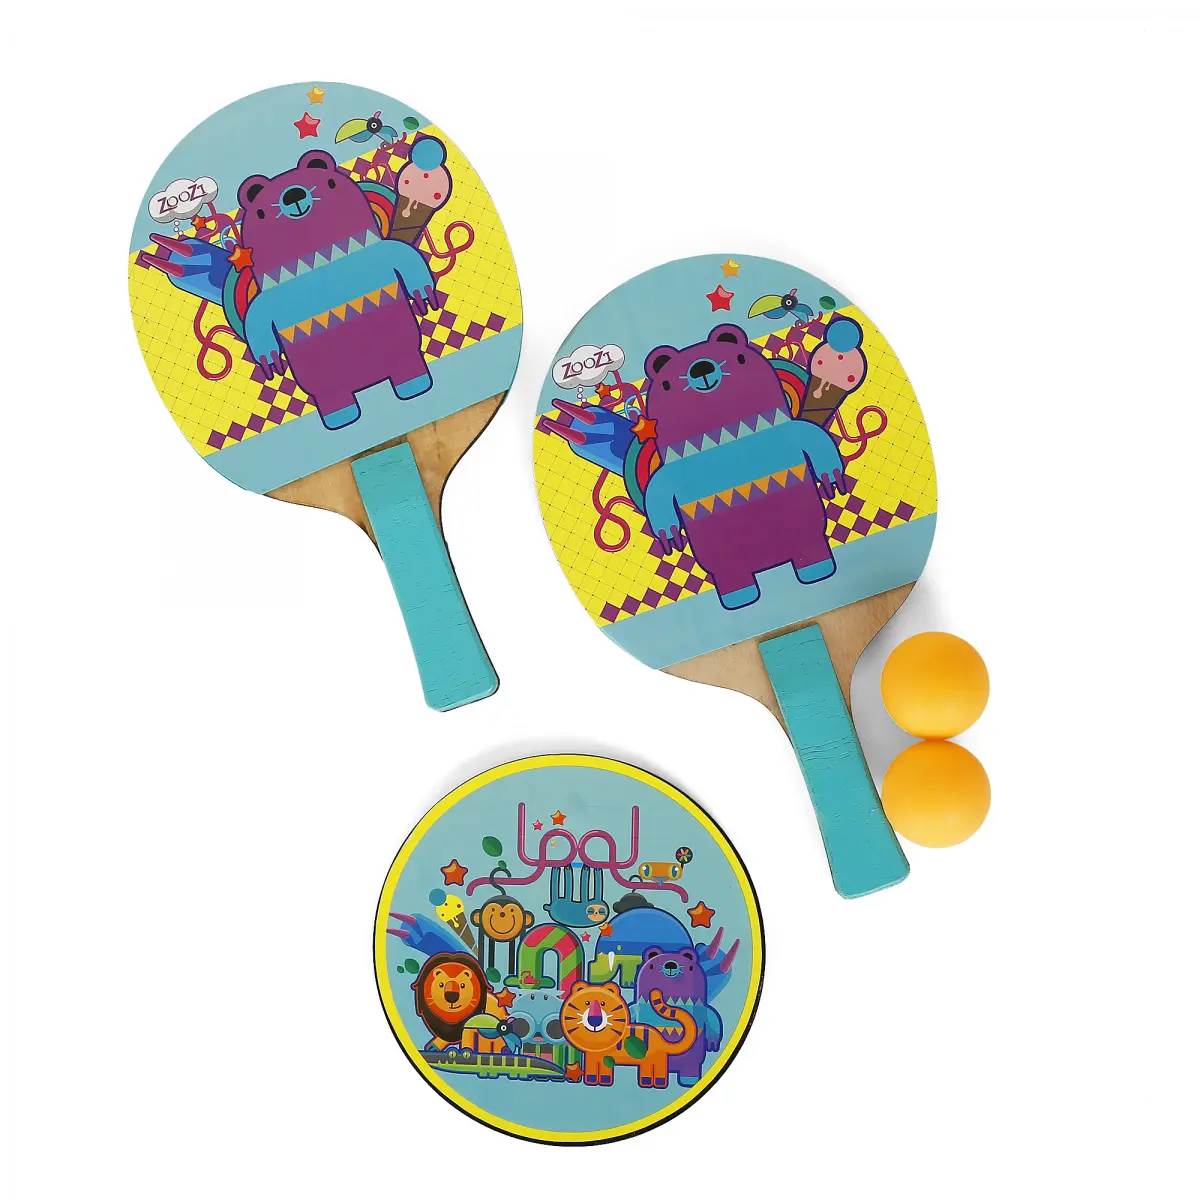 Zoozi Table Tennis Trainer Set, 5Y+, Multicolour